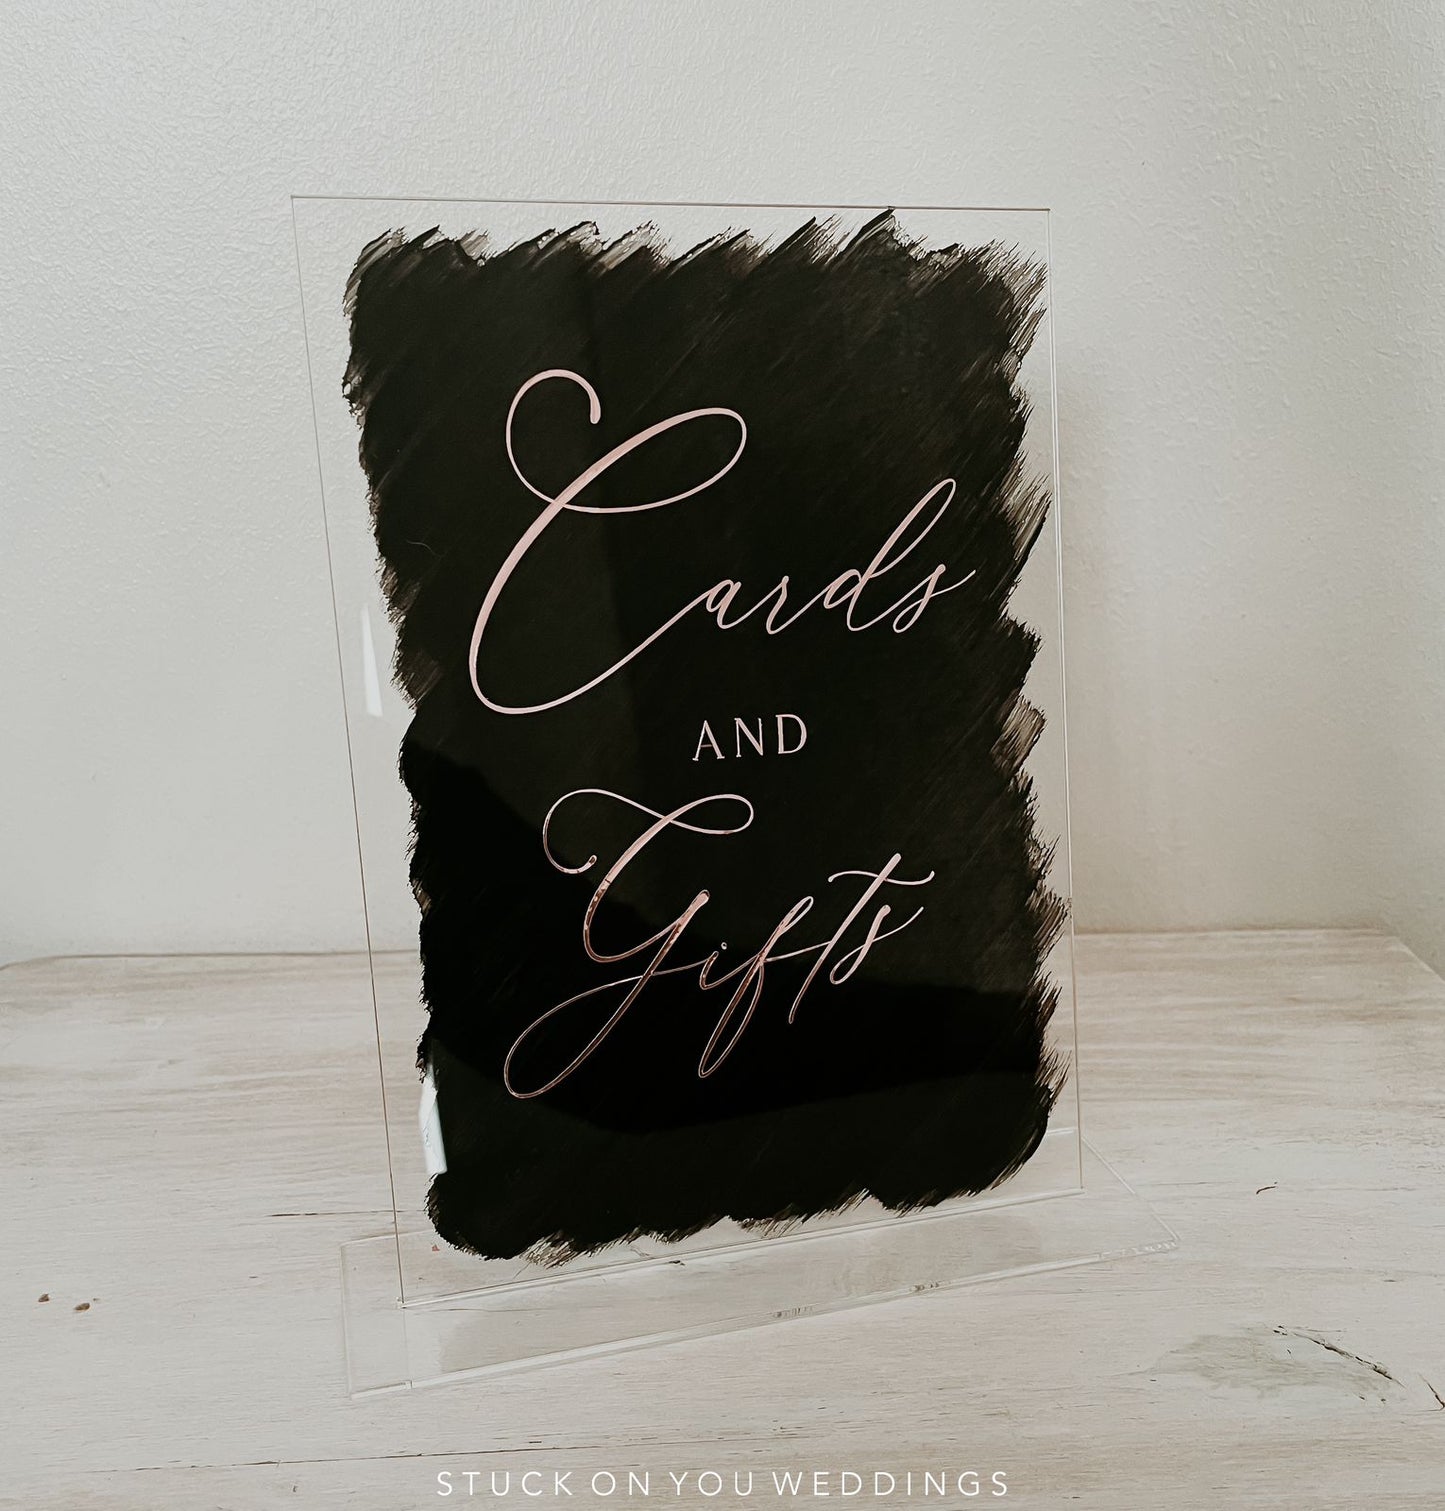 Cards & Gifts - A5 Acrylic Table Talker